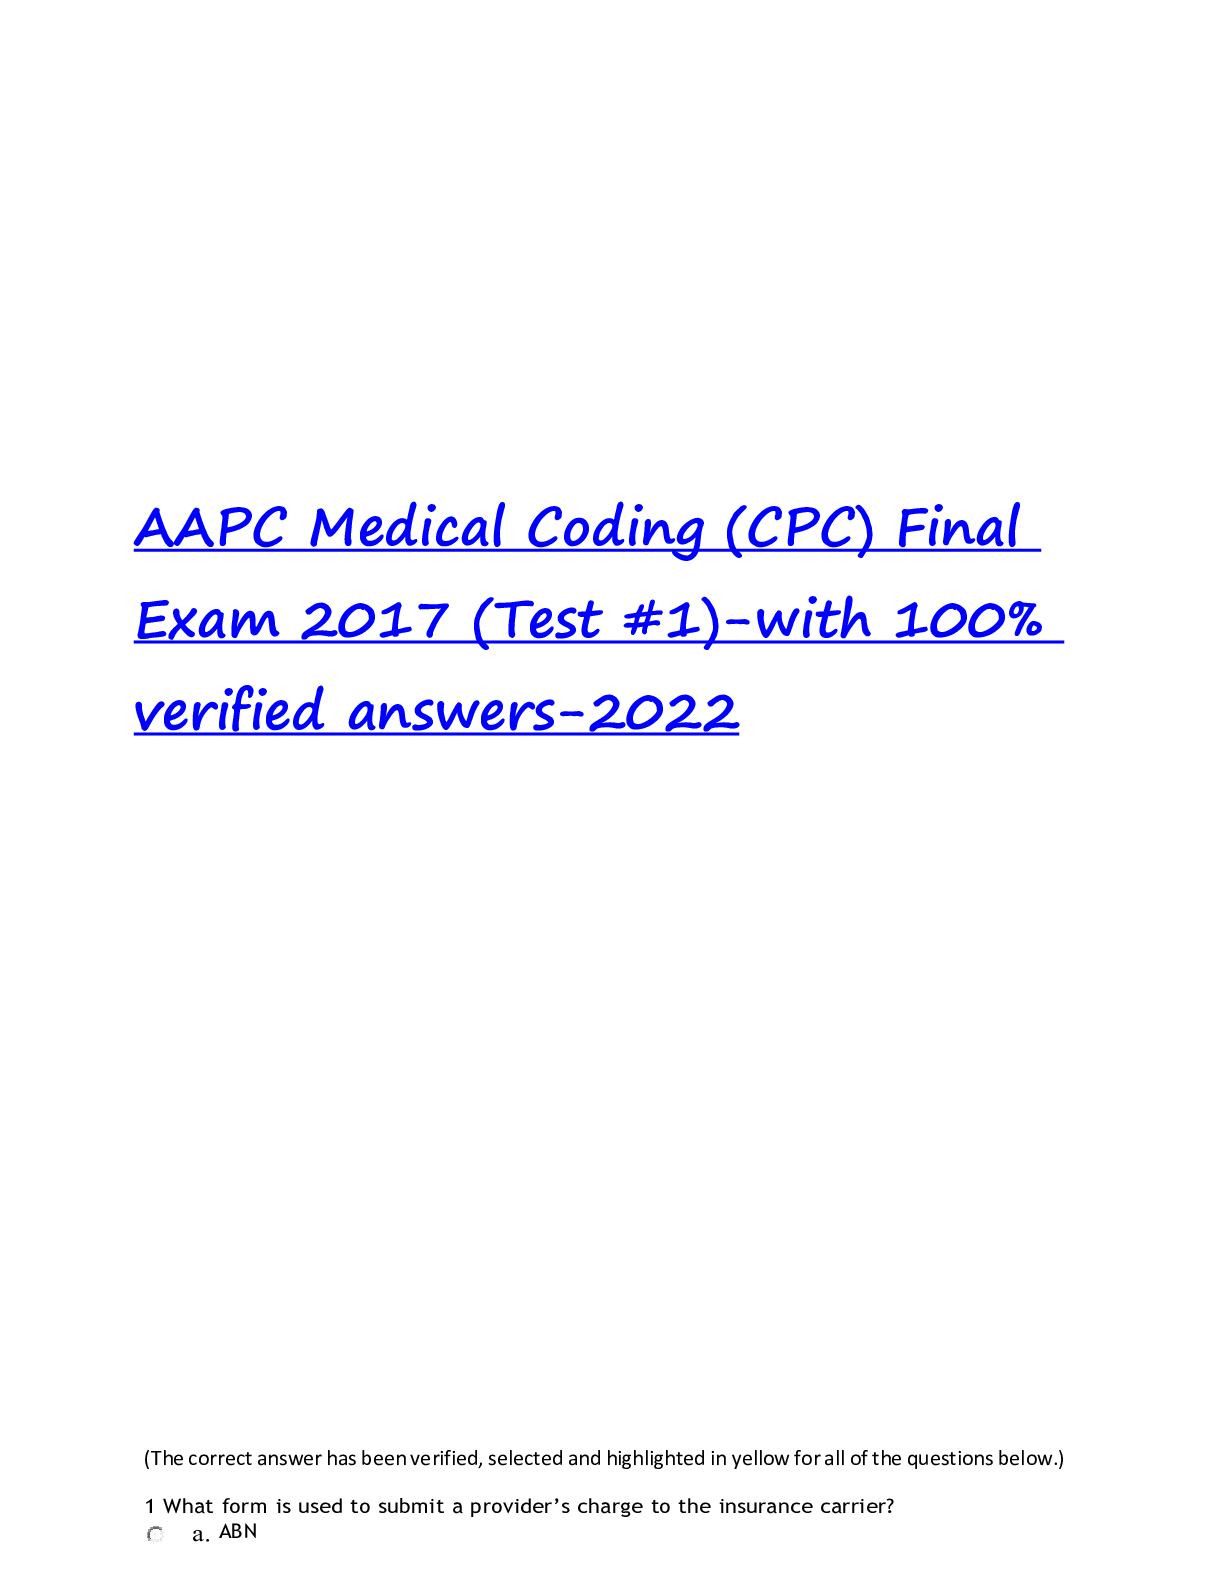 AAPC Medical Coding (CPC) Final Exam 2017 (Test 1)with 100 verified